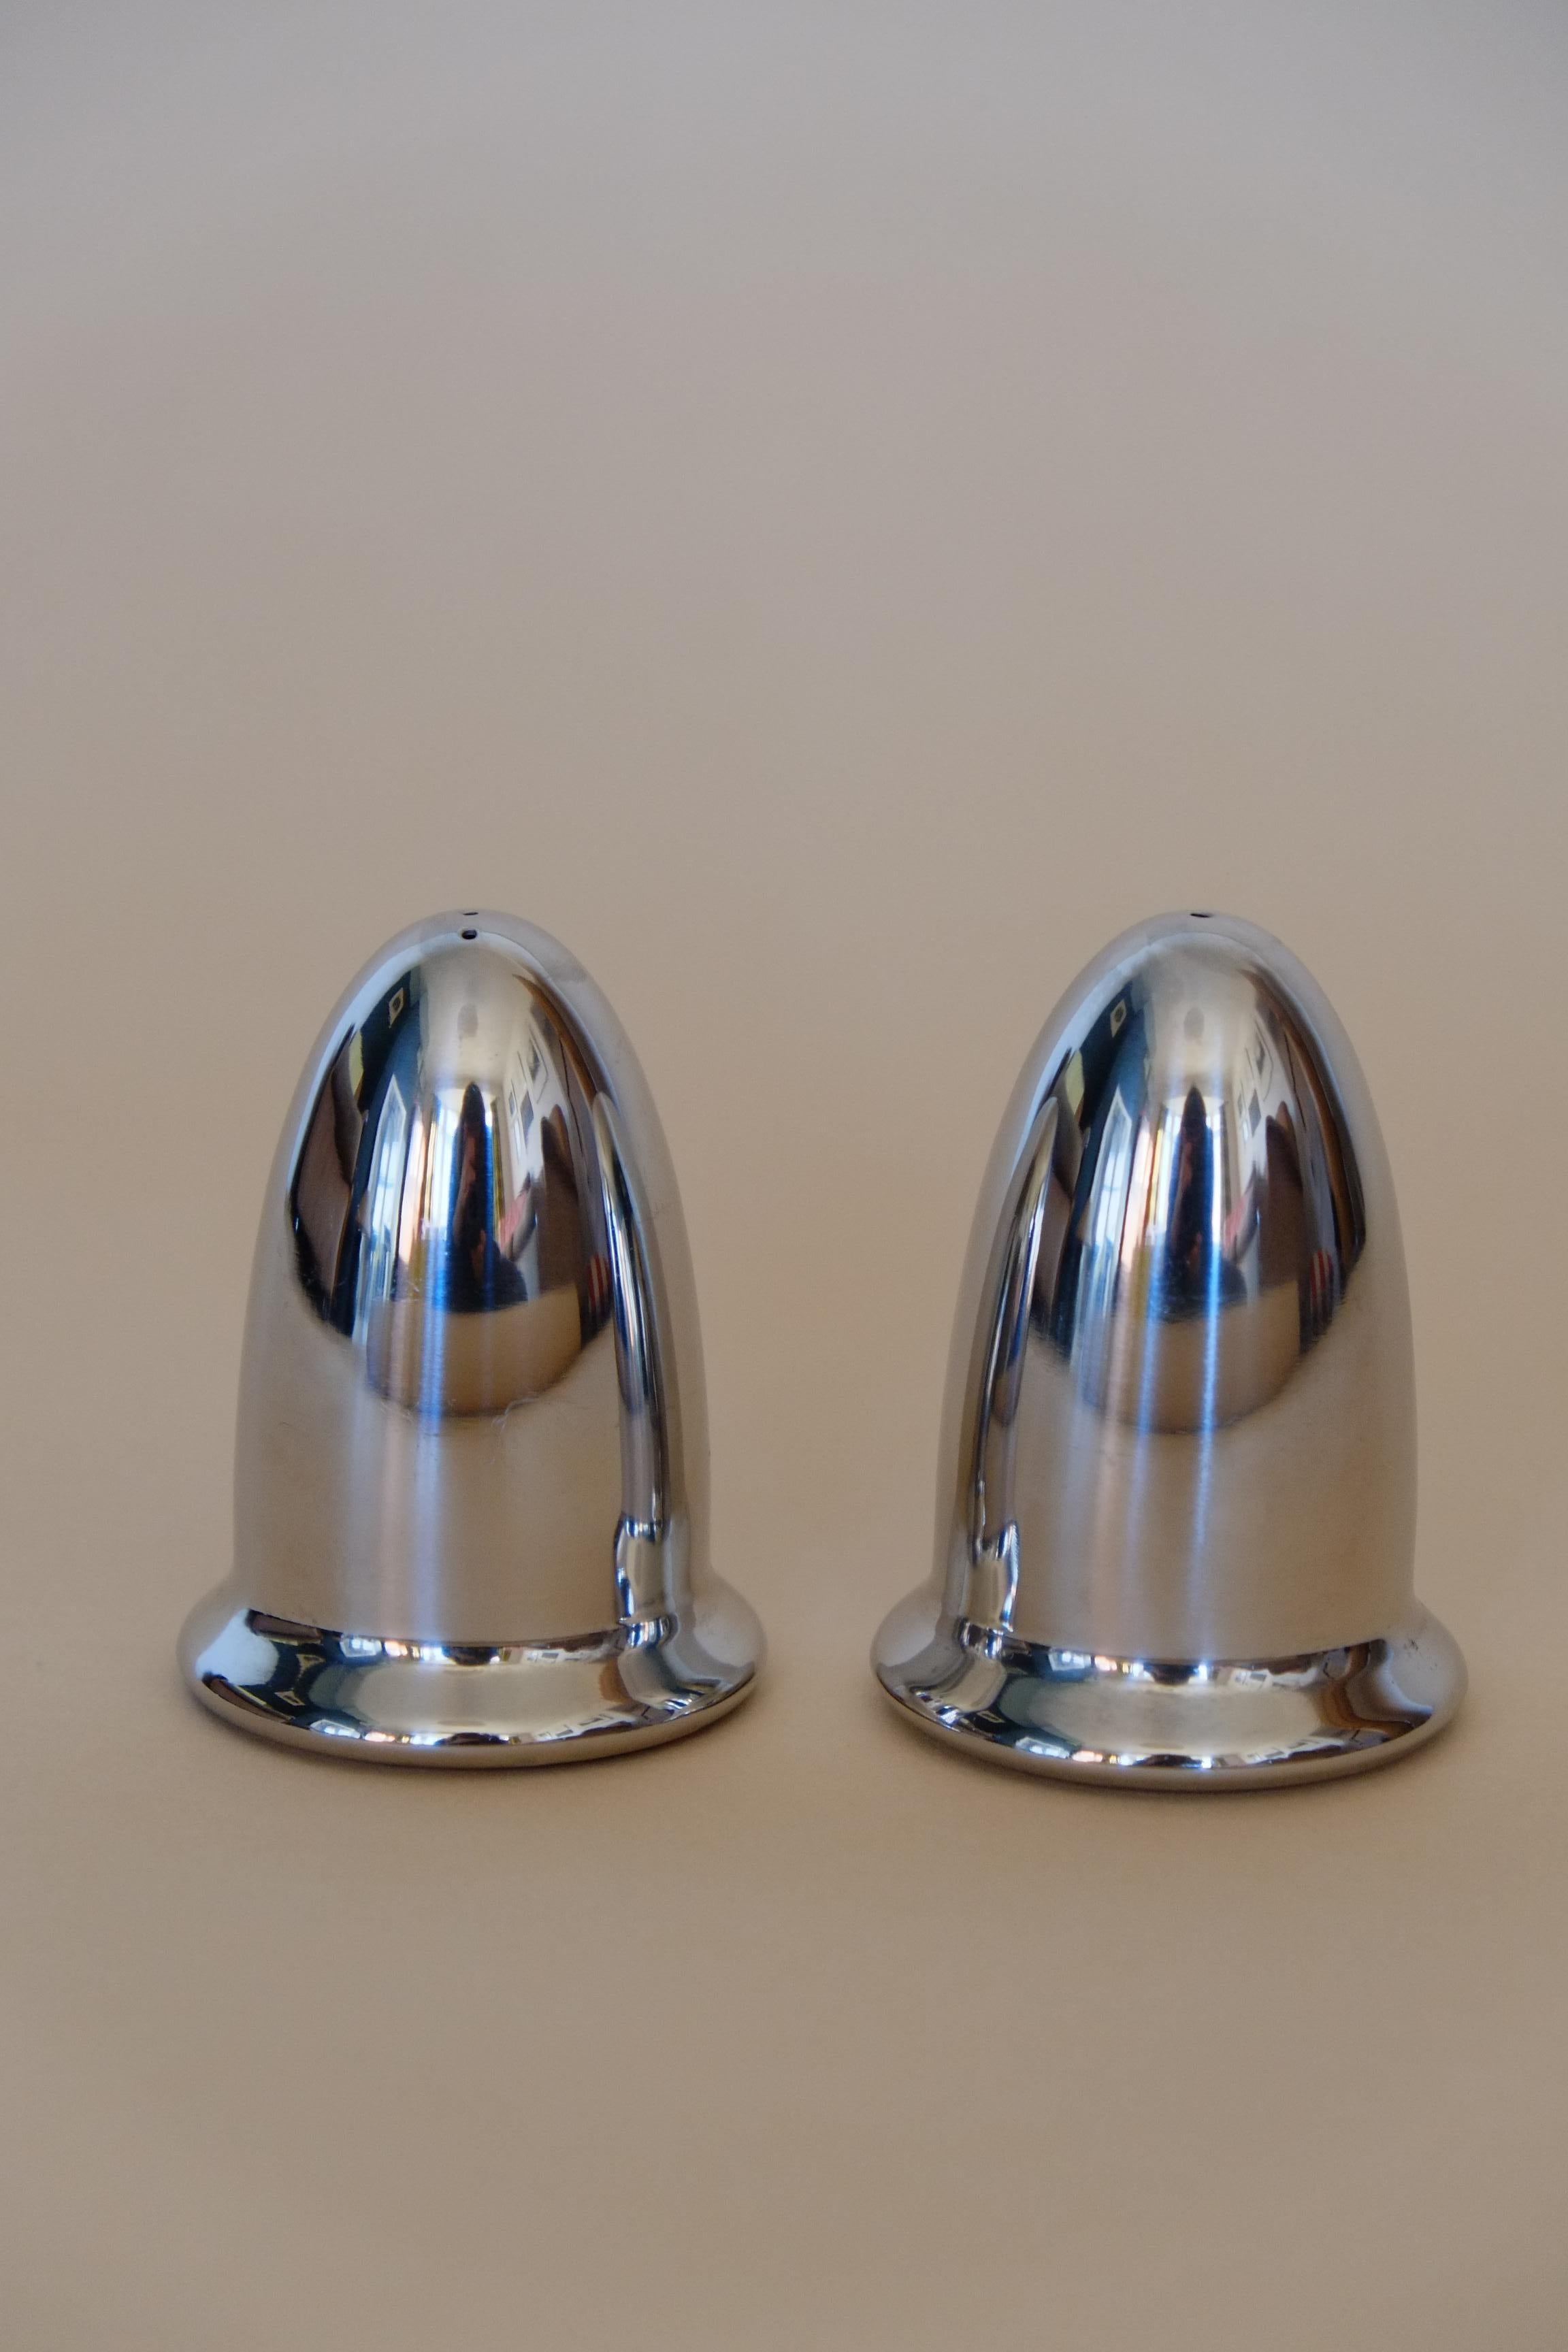 Mid century atomic bullet shaped salt and pepper shakers. This set is from the mid 20th century - the simplest bullet shaped design makes for a timeless piece. The perfect addition to any modern table. 

measures approximately 10 cm high x 6 cm